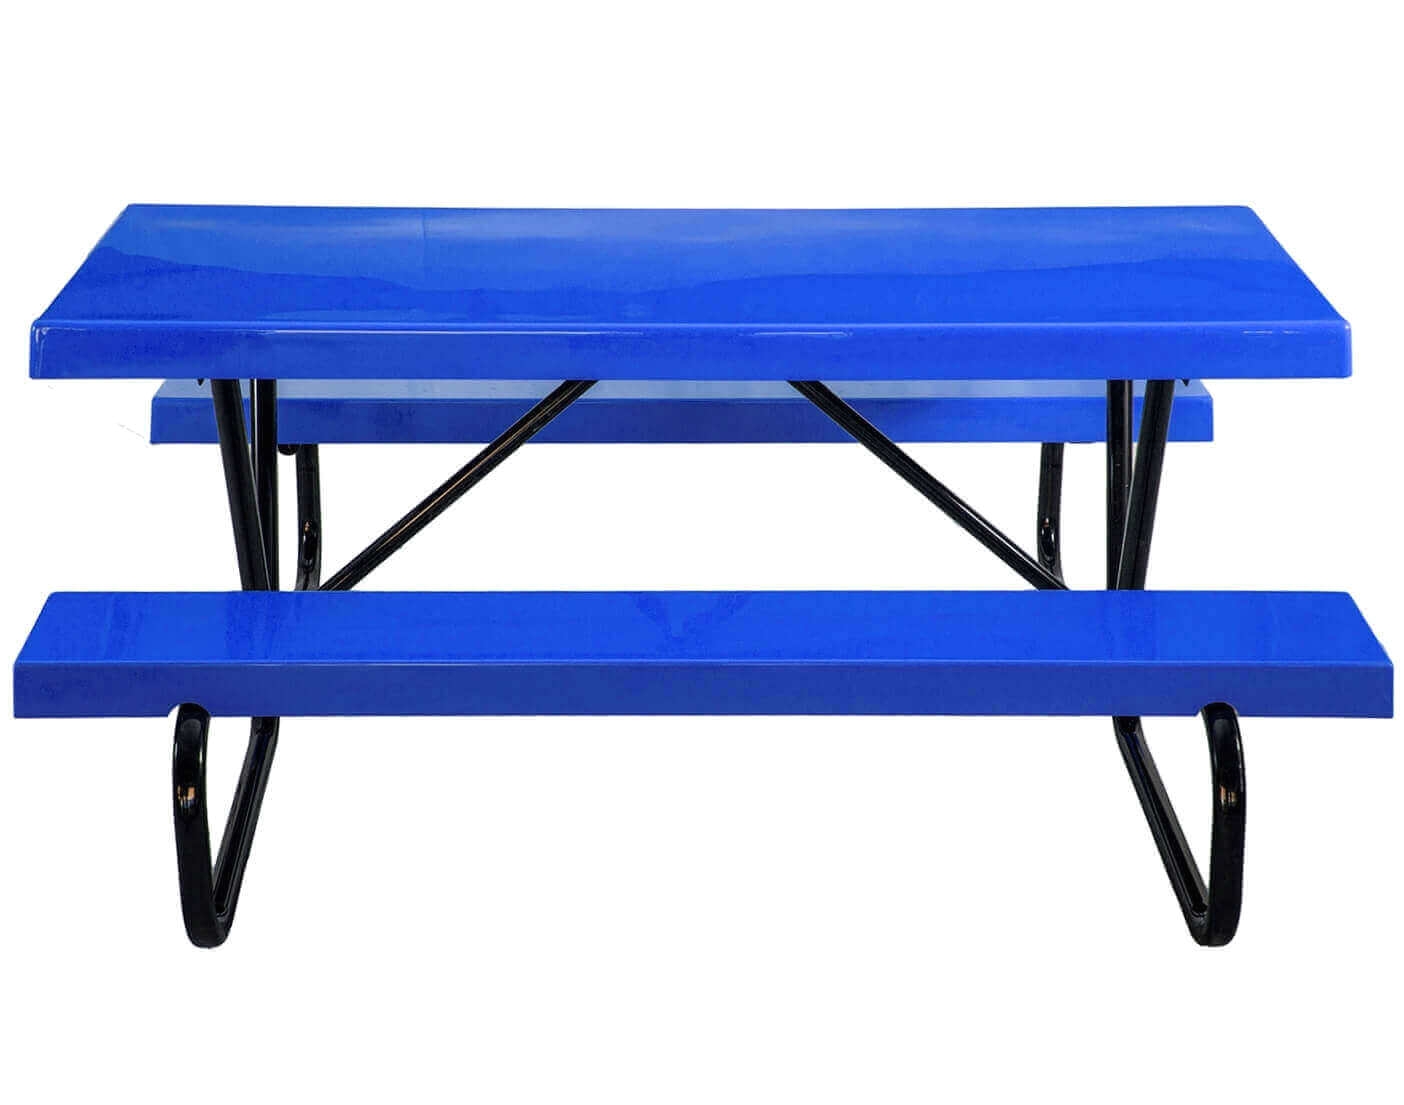 8 ft fiberglass picnic table with 1 5 8 bolted frame